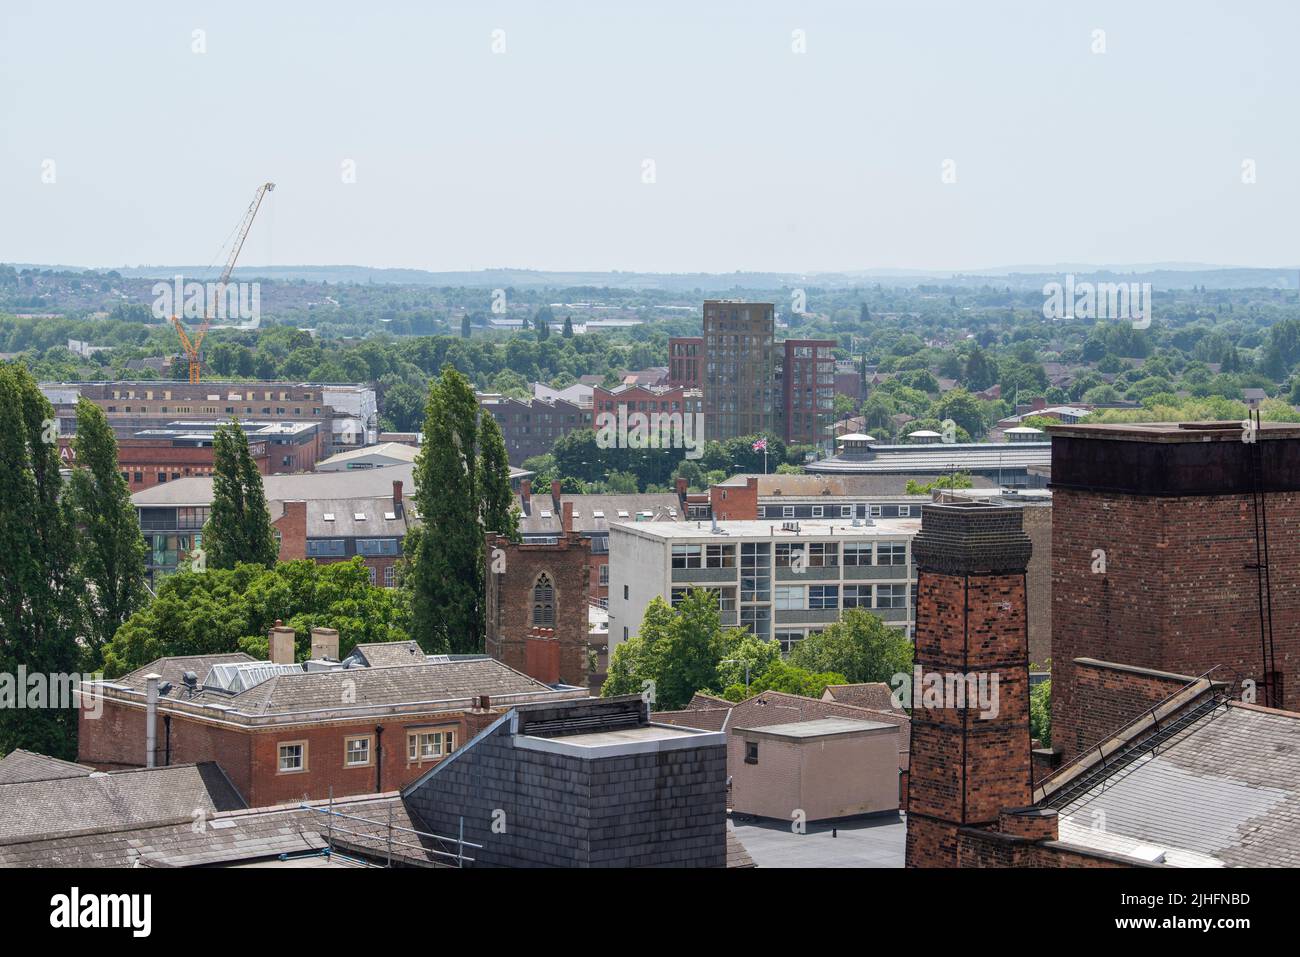 Looking out to the South West of the City from the roof of the Pearl Assurance Building in Nottingham, Nottinghamshire England UK Stock Photo